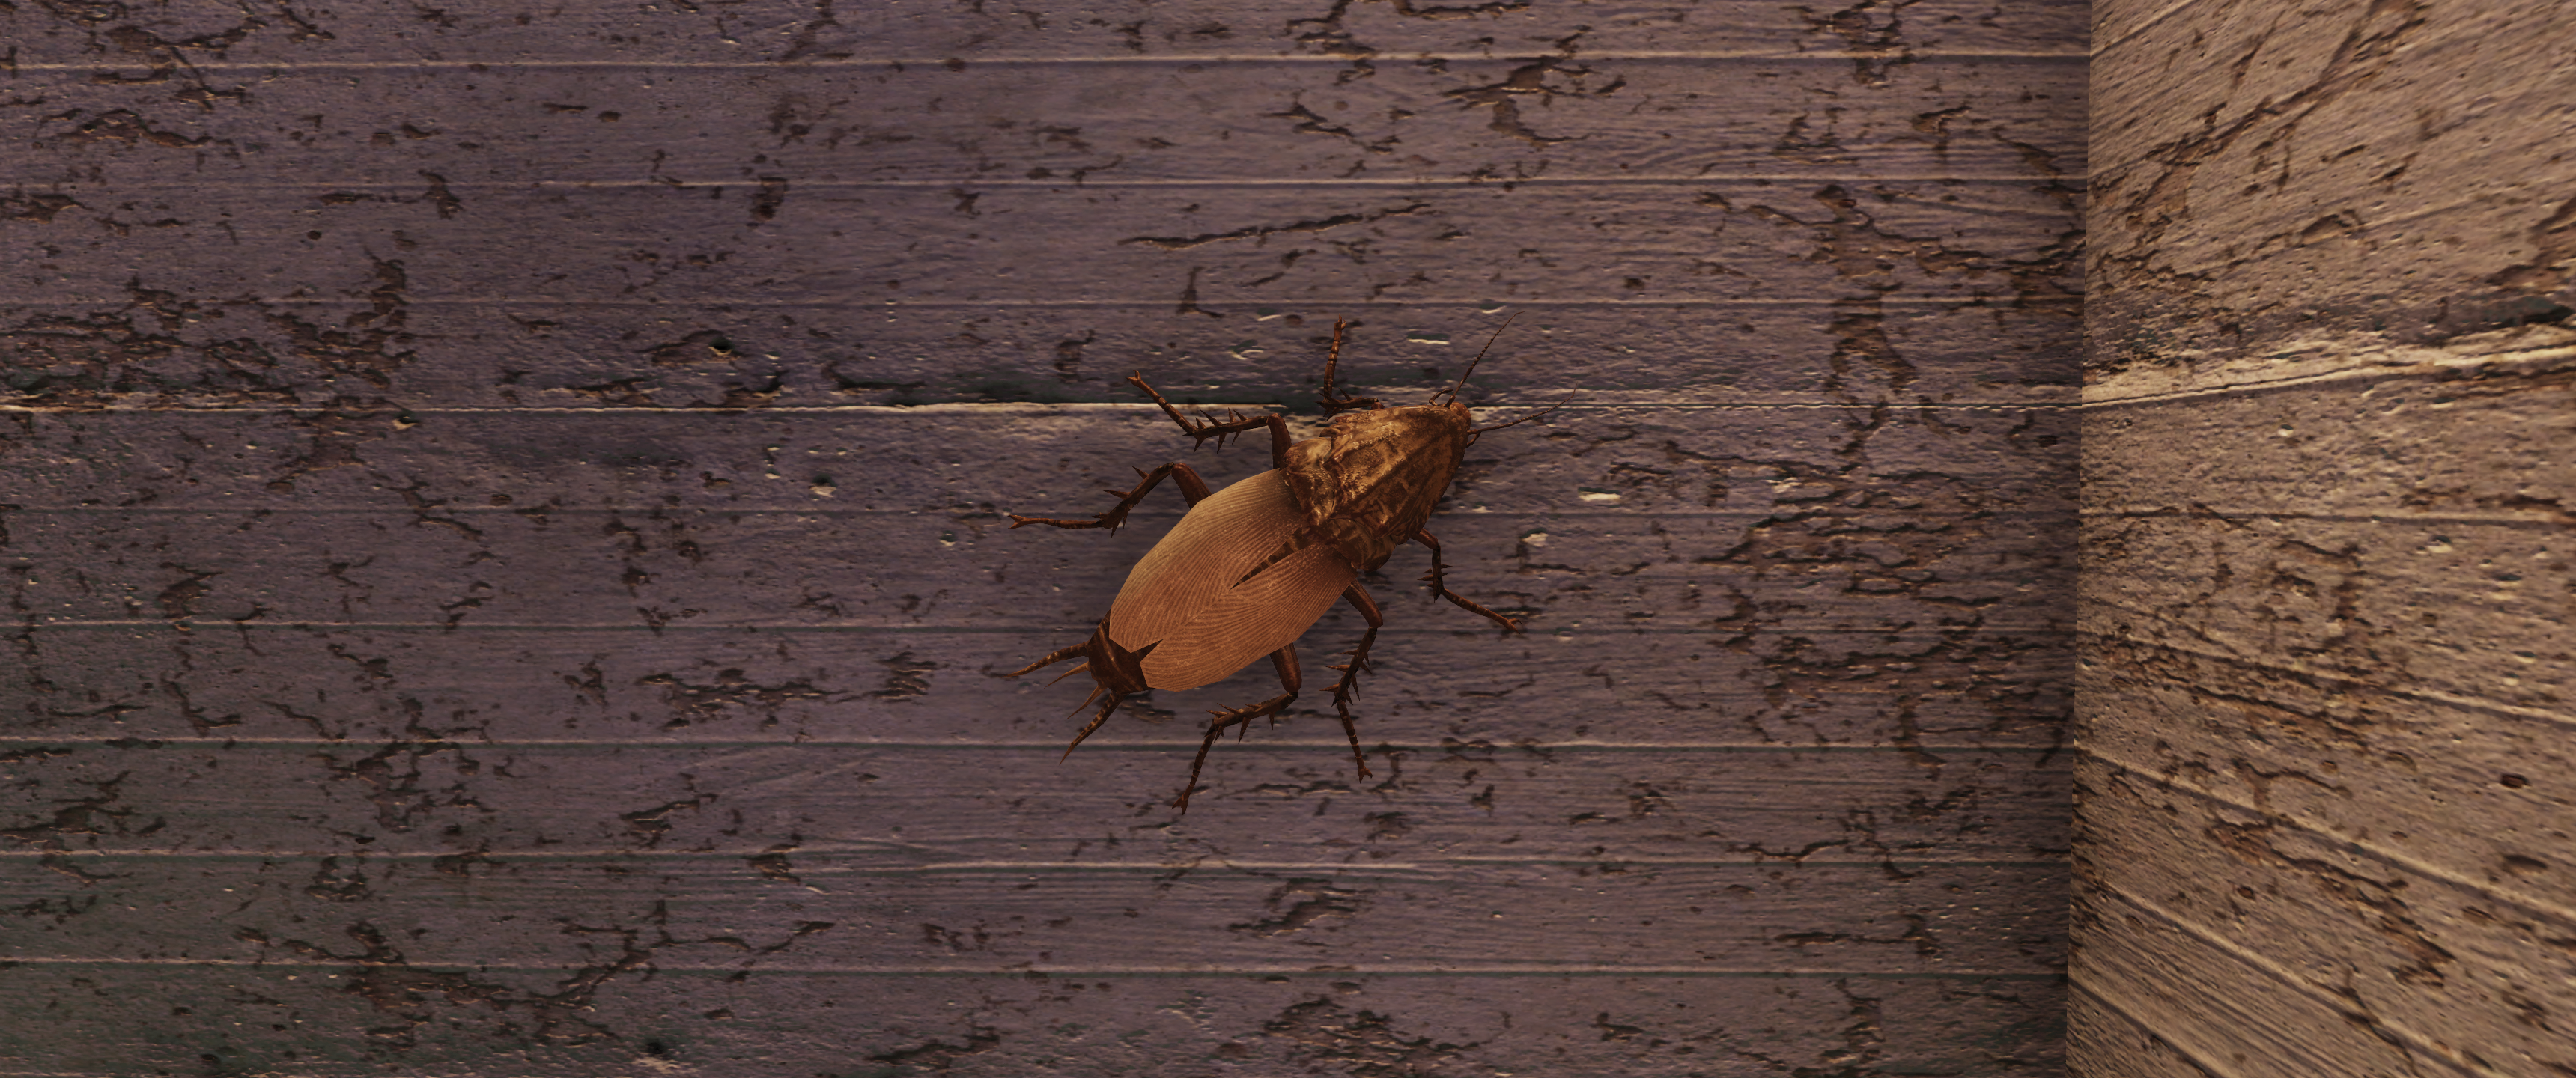 General 3440x1440 Fallout 76 Fallout cockroaches screen shot video game art insect video games closeup CGI